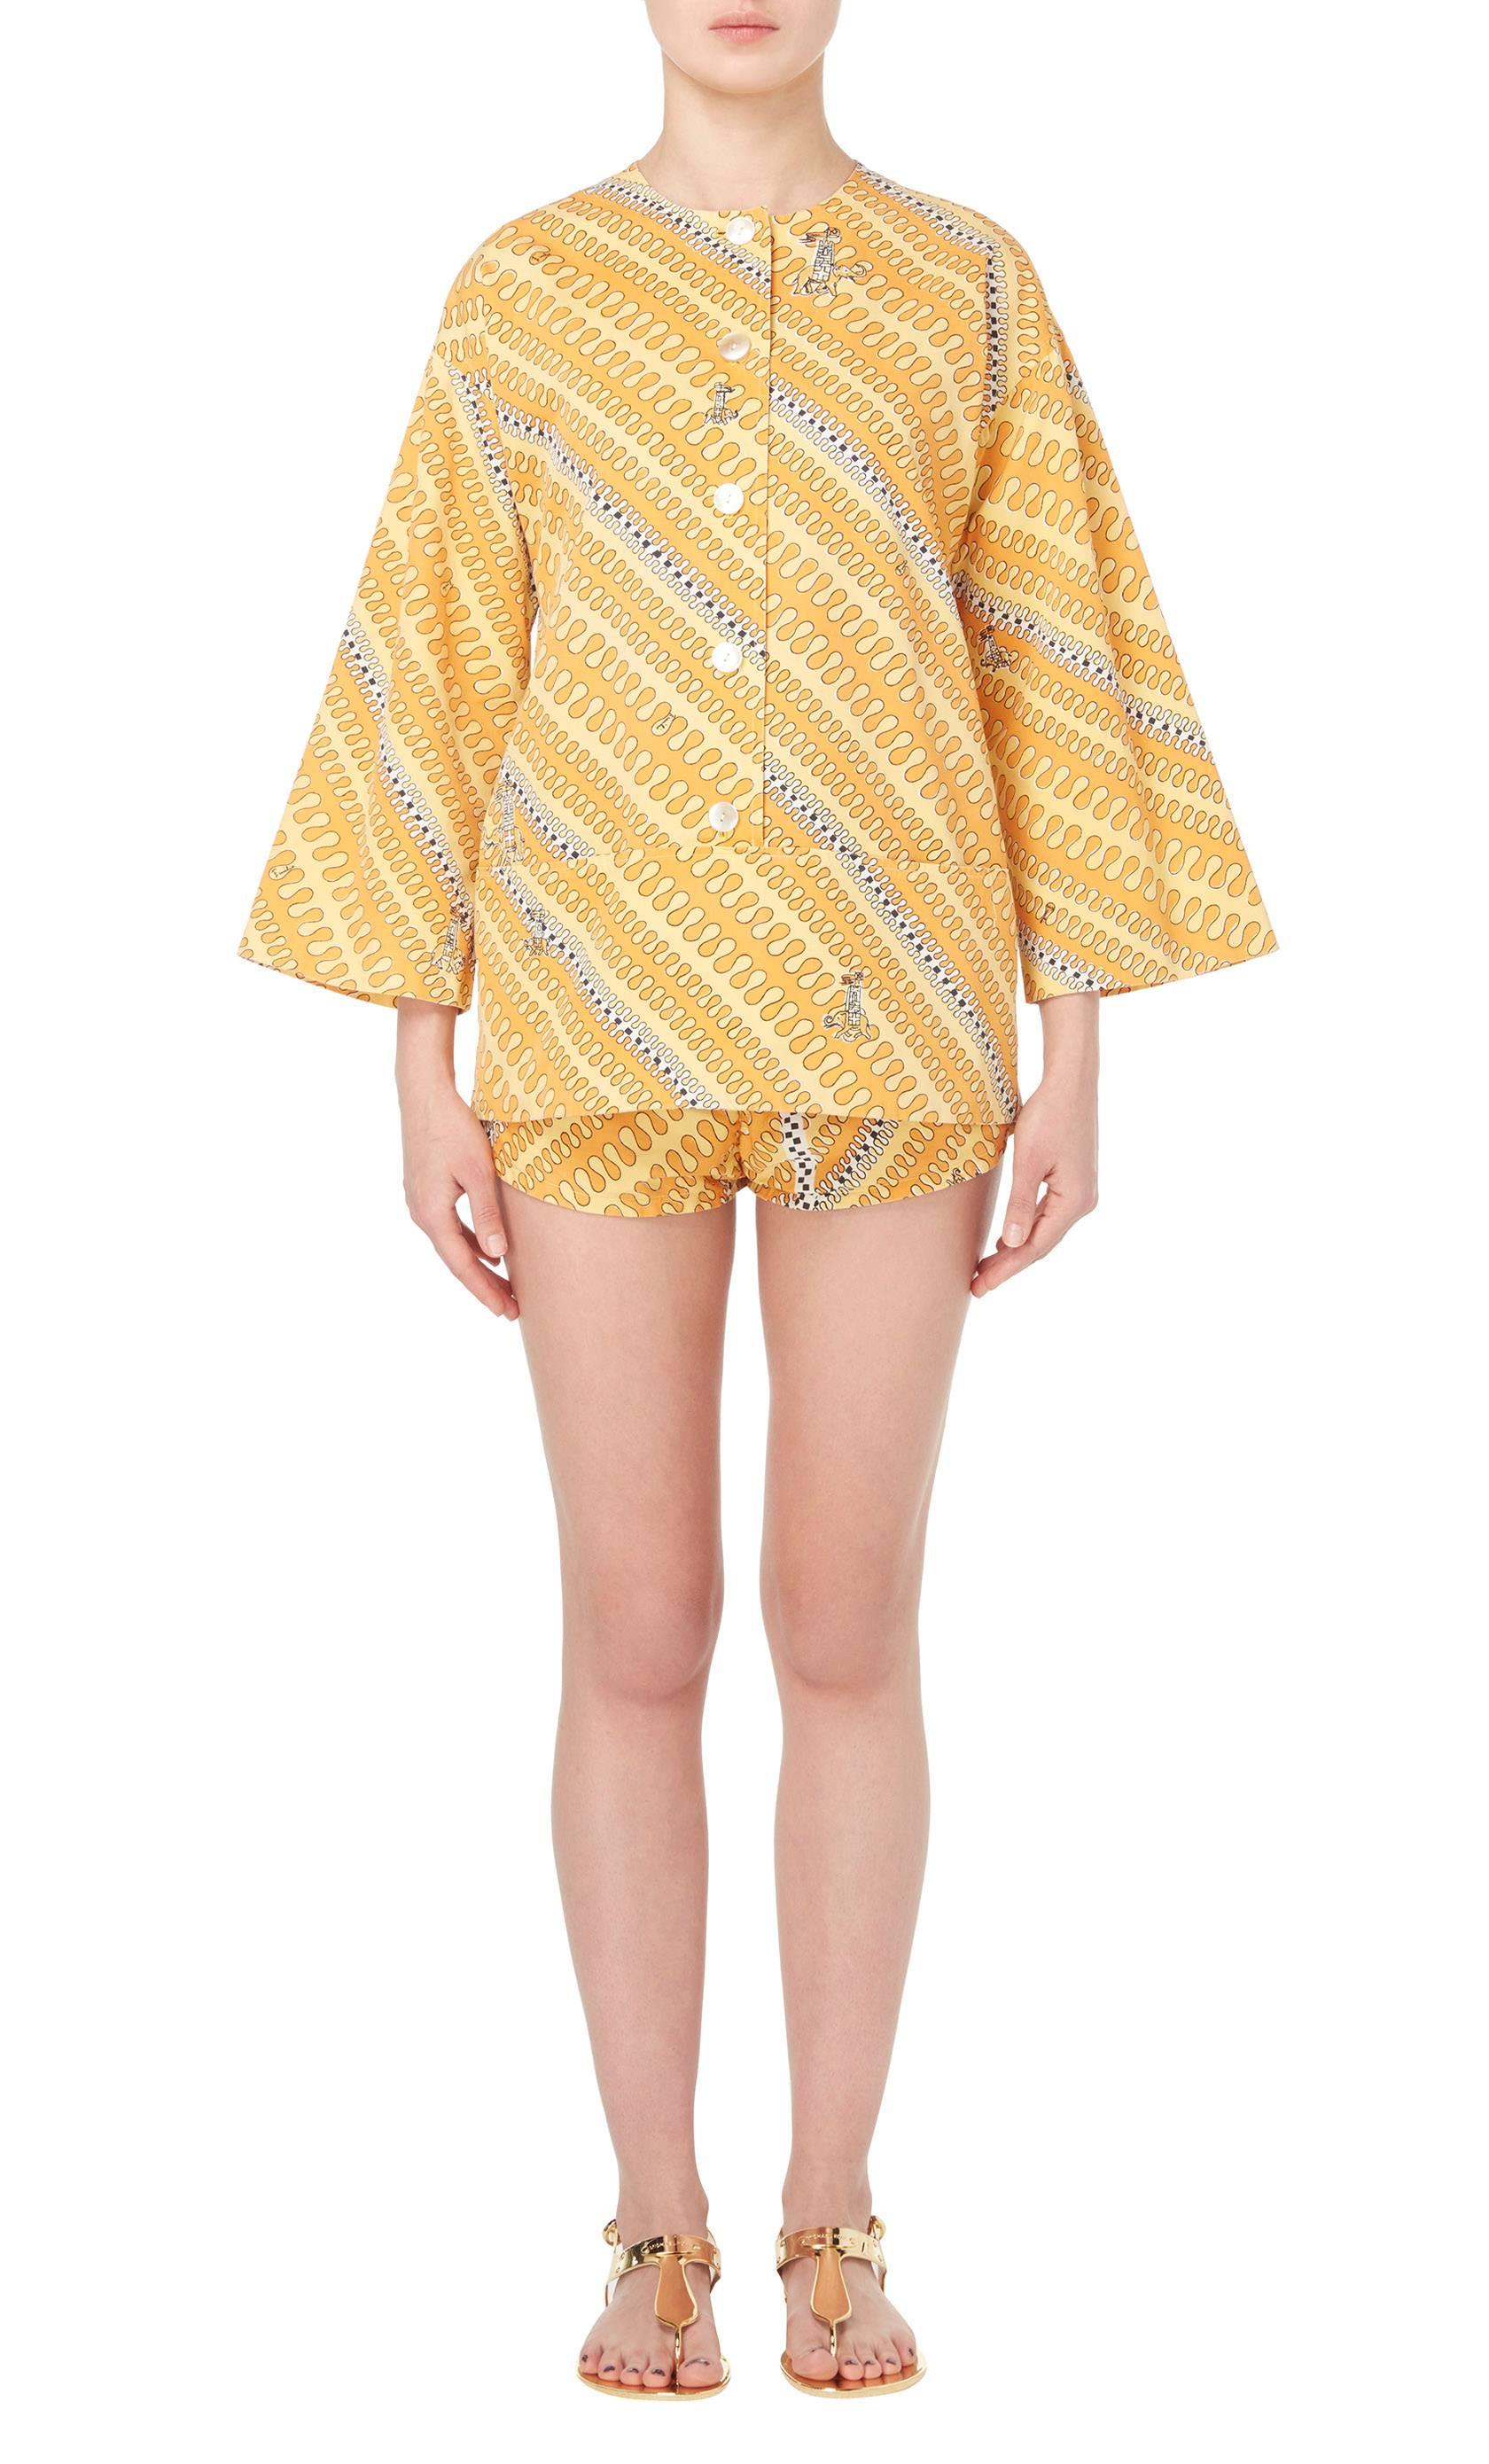 A fabulous piece of Pucci, this cotton playsuit is the perfect choice for hot summer days spent at the beach or by the pool. Featuring a fun abstract print in shades of orange and yellow with elephant motifs, the playsuit has a boxy cut, with wide